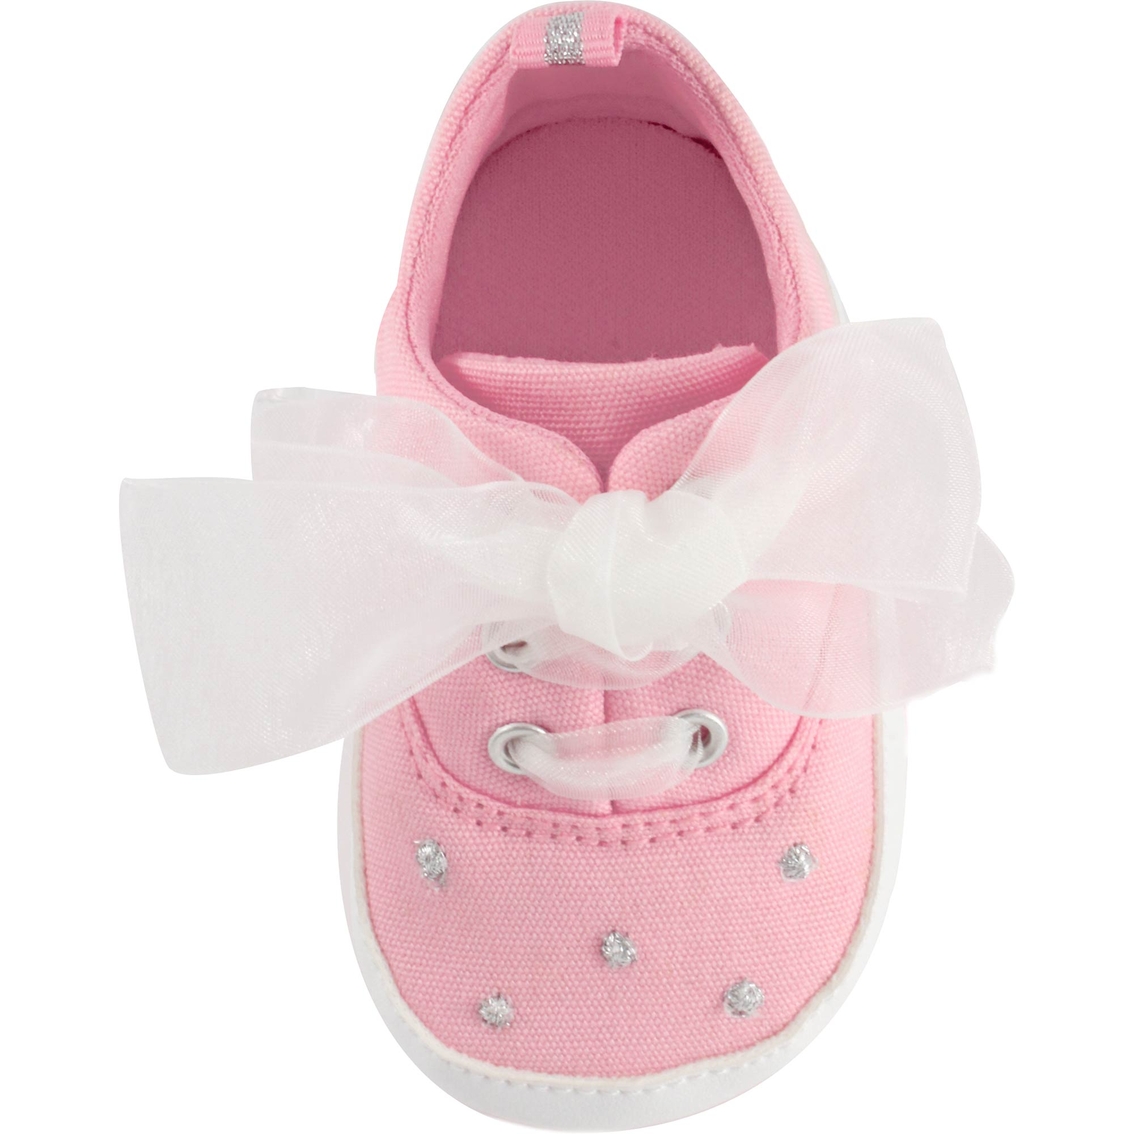 Wee Kids Infant Girls Lace Up Sneakers - Image 3 of 4